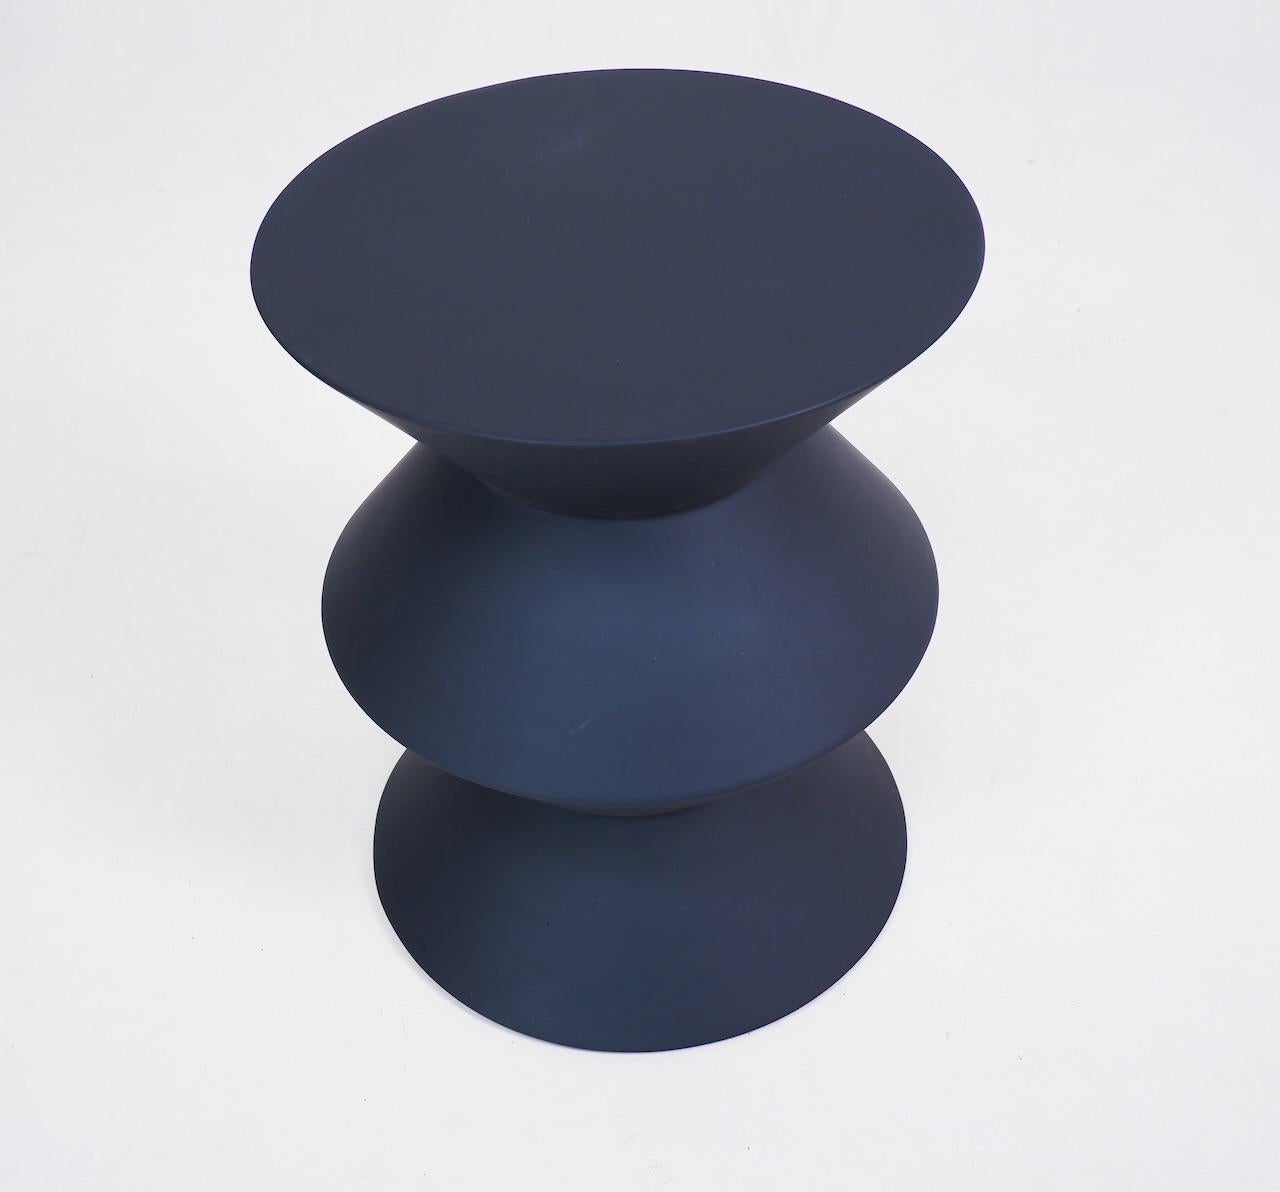 Sculptural stool / side table designed by Rodolfo Dordoni and produced by Minotti. Refinished in a matt dark grey.

Dimensions (cm, approx): 
Height: 45
Diameter: 36

Fair condition with surface imperfections